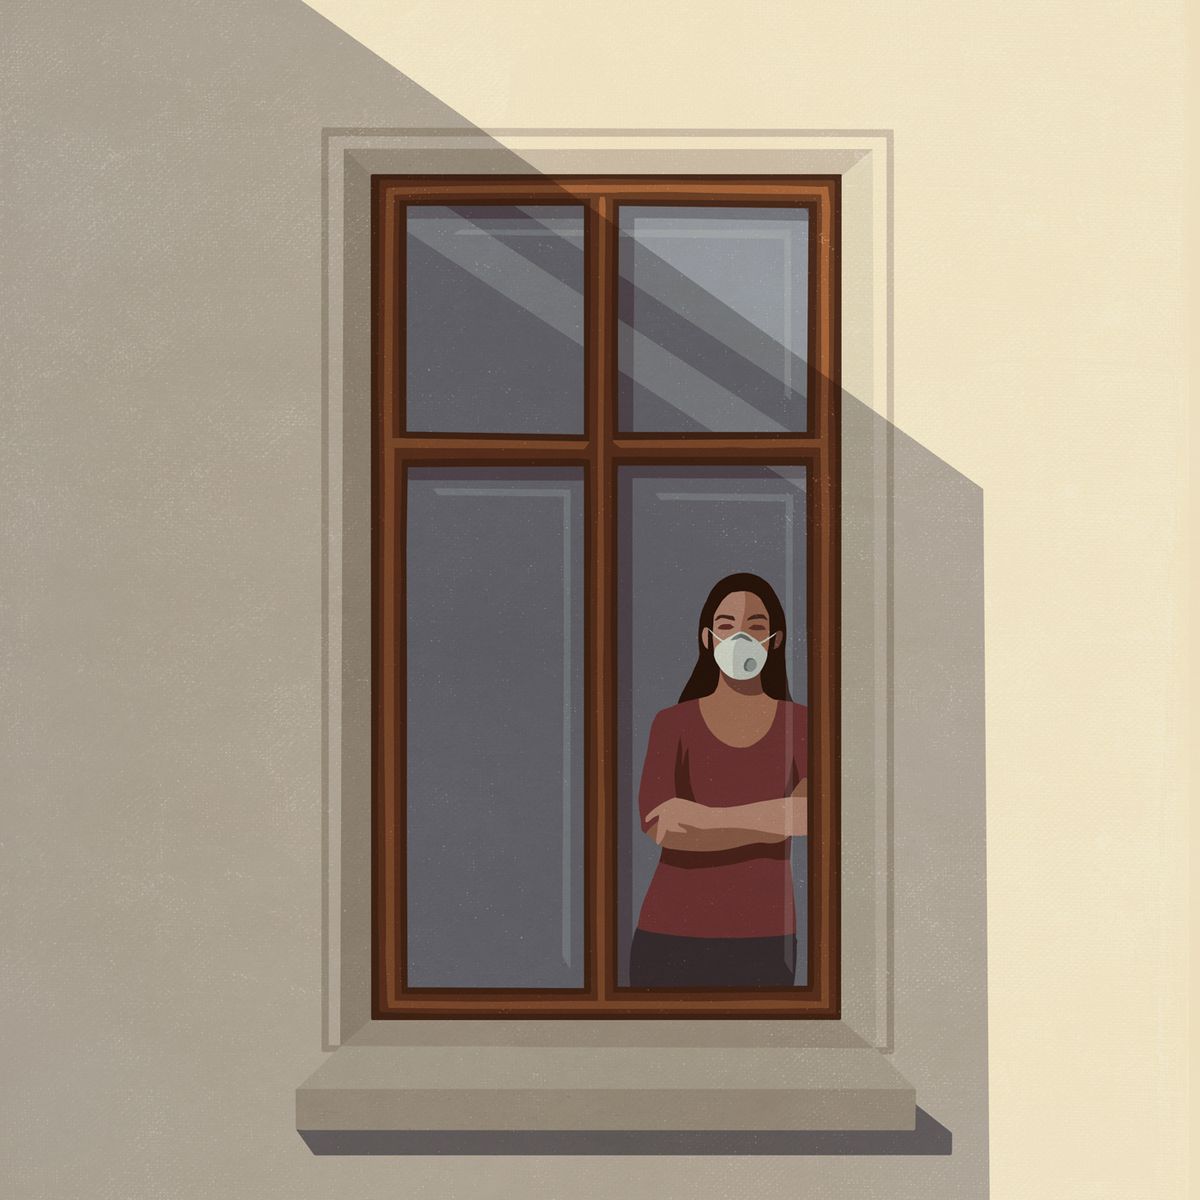 A drawing of a person wearing a breathing mask, standing looking out of a window.